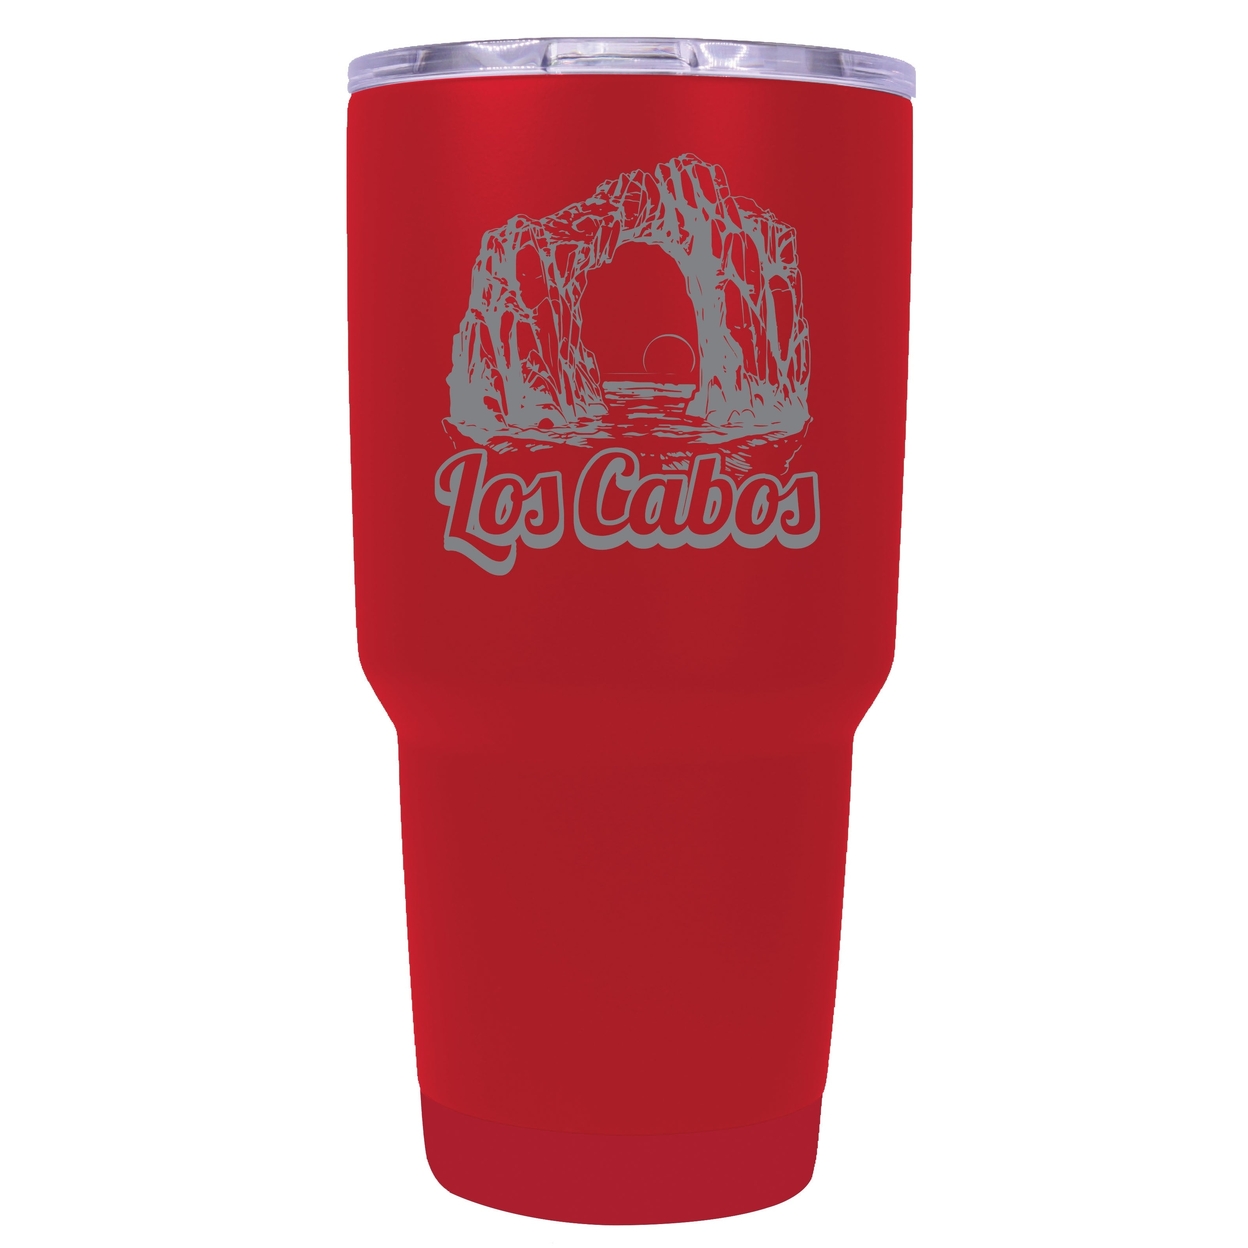 Los Cabos Mexico Souvenir 24 Oz Engraved Insulated Stainless Steel Tumbler - Black,,Single Unit